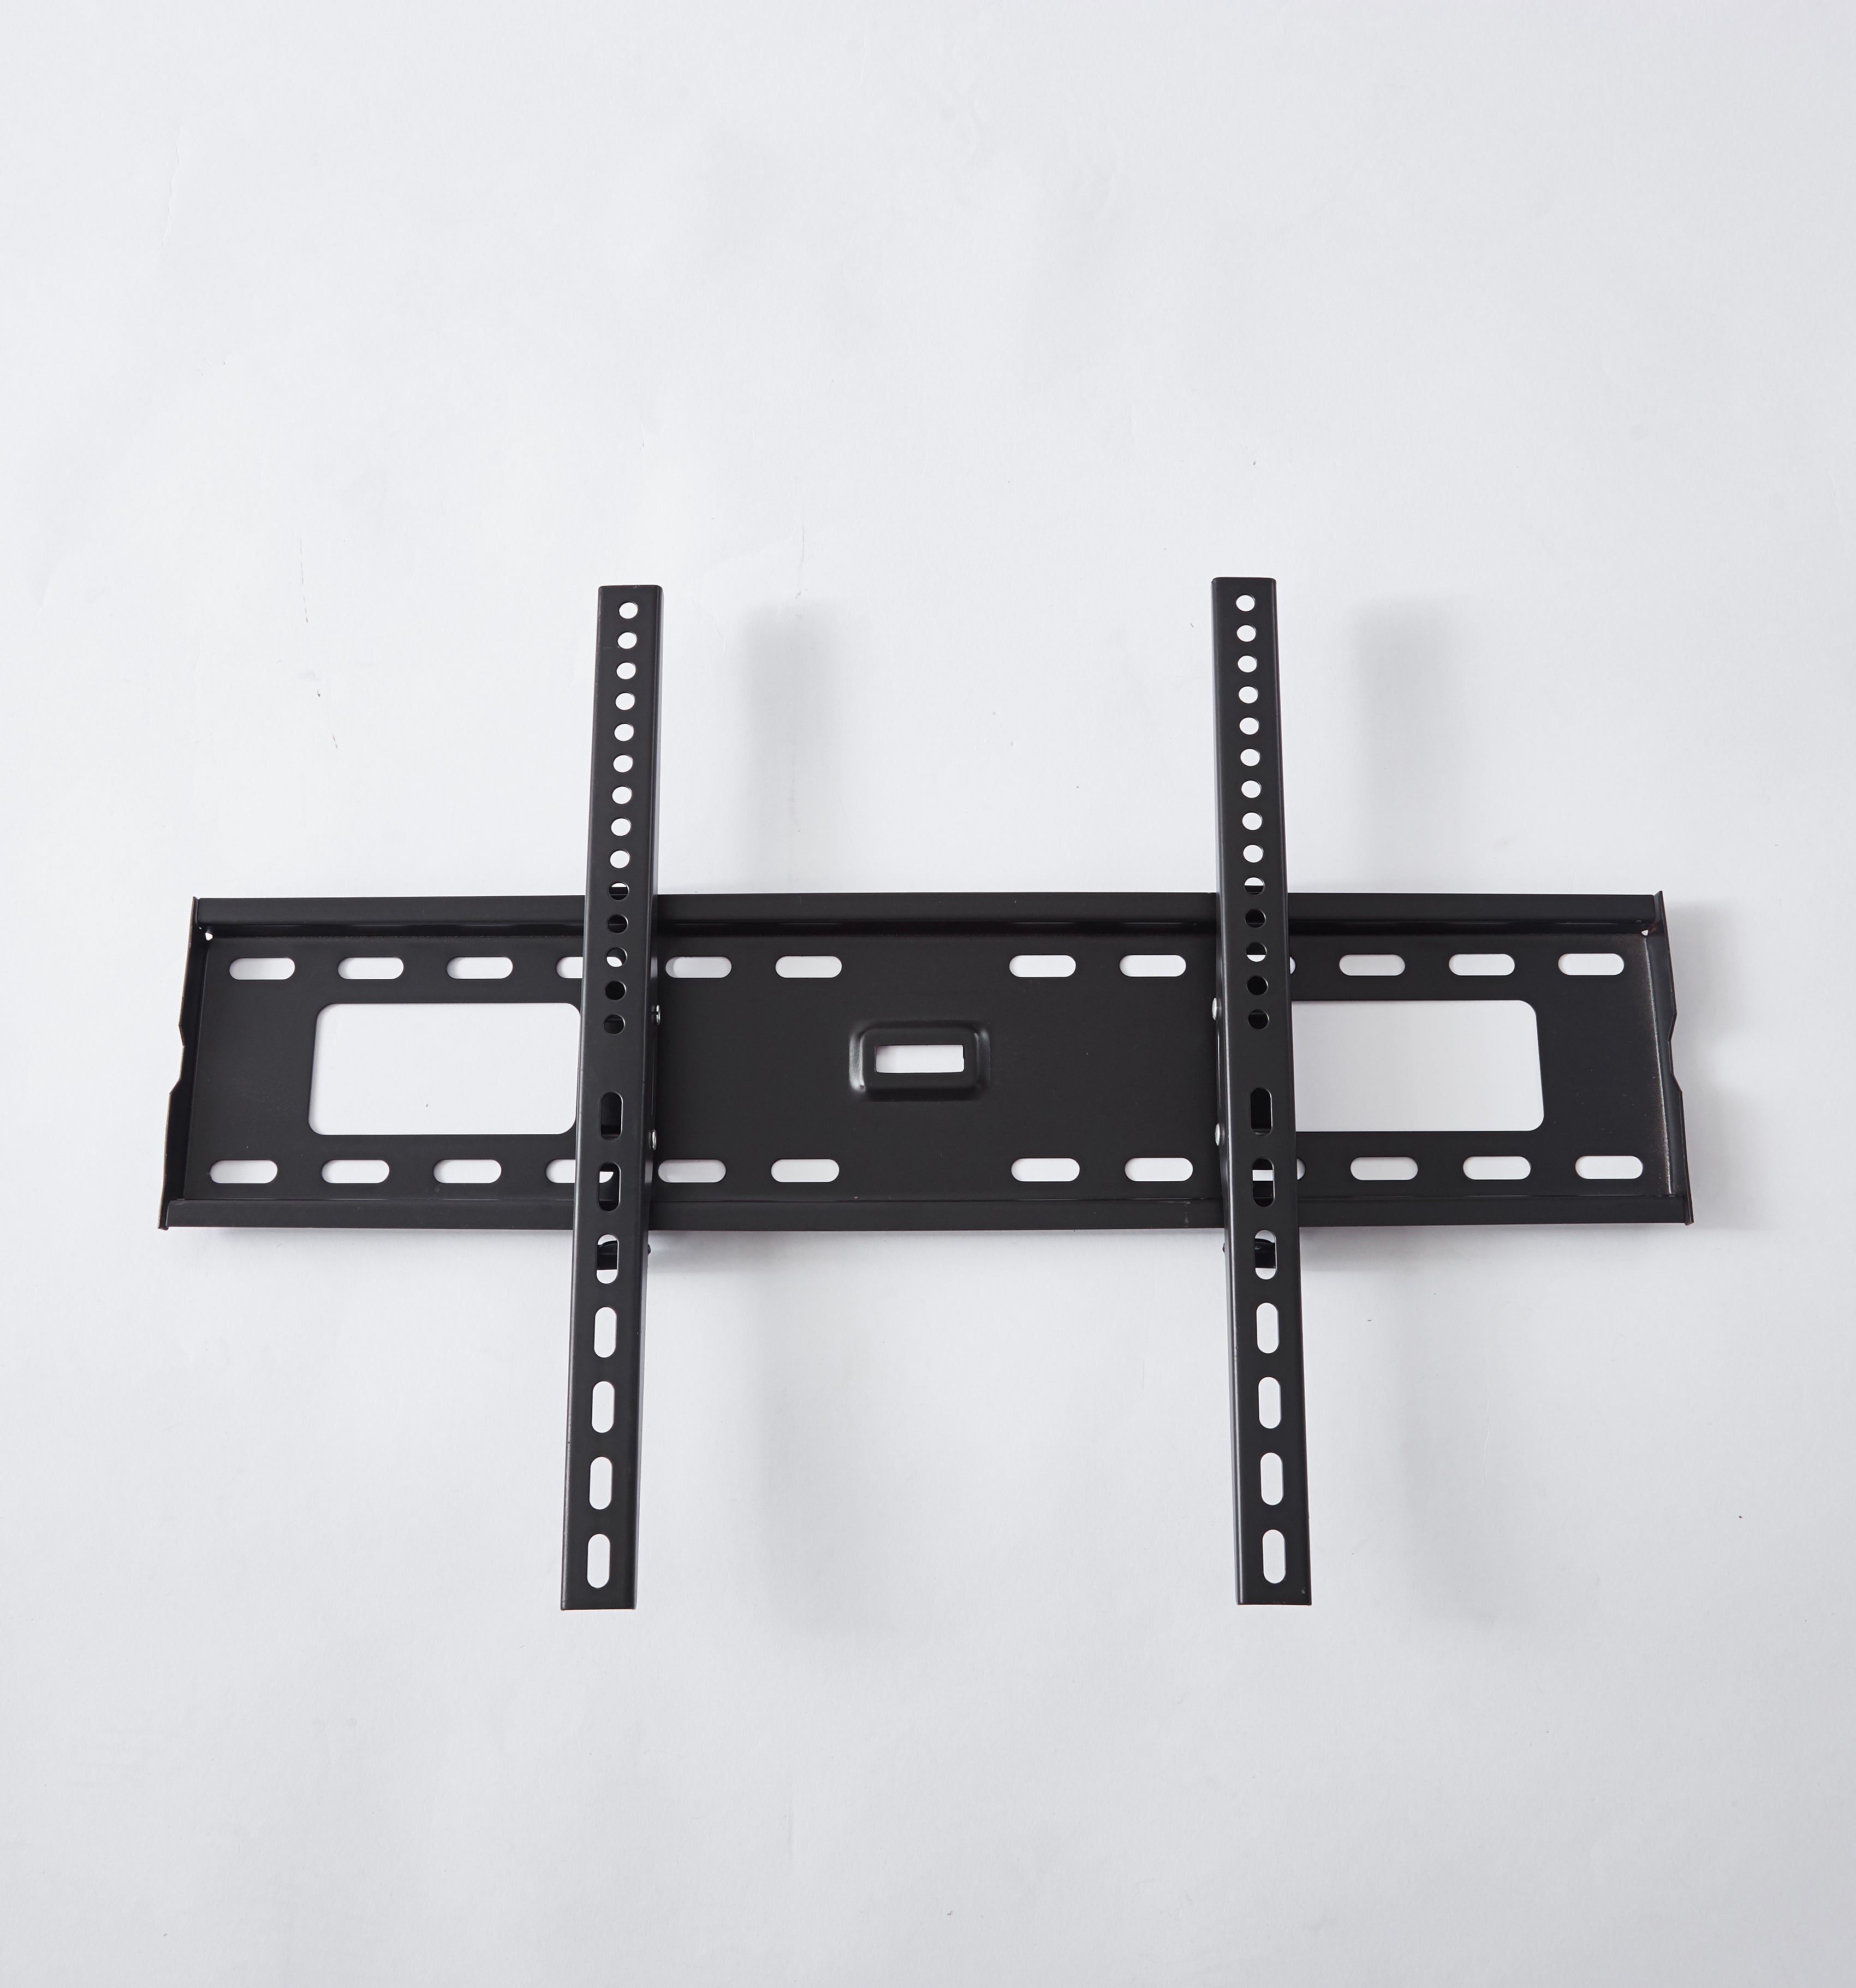 Full Motion TV Wall Bracket Mount for 32 to 70 inch screens3